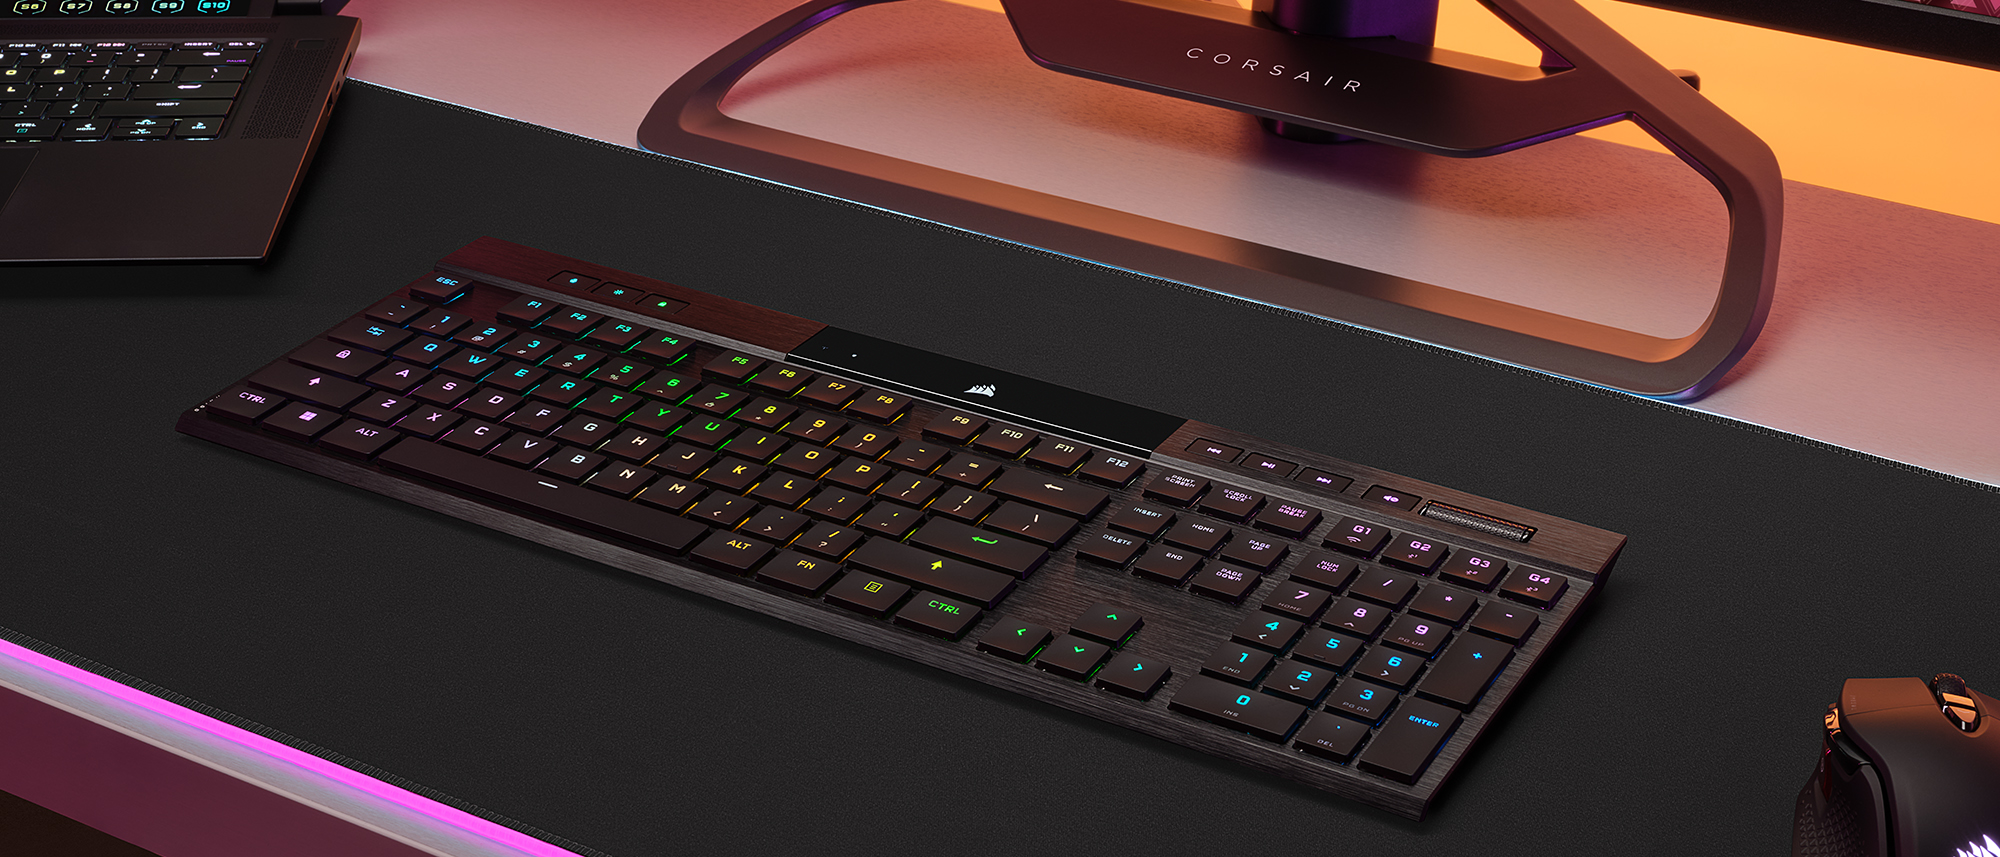 Corsair K100 Air Wireless review: too expensive to recommend